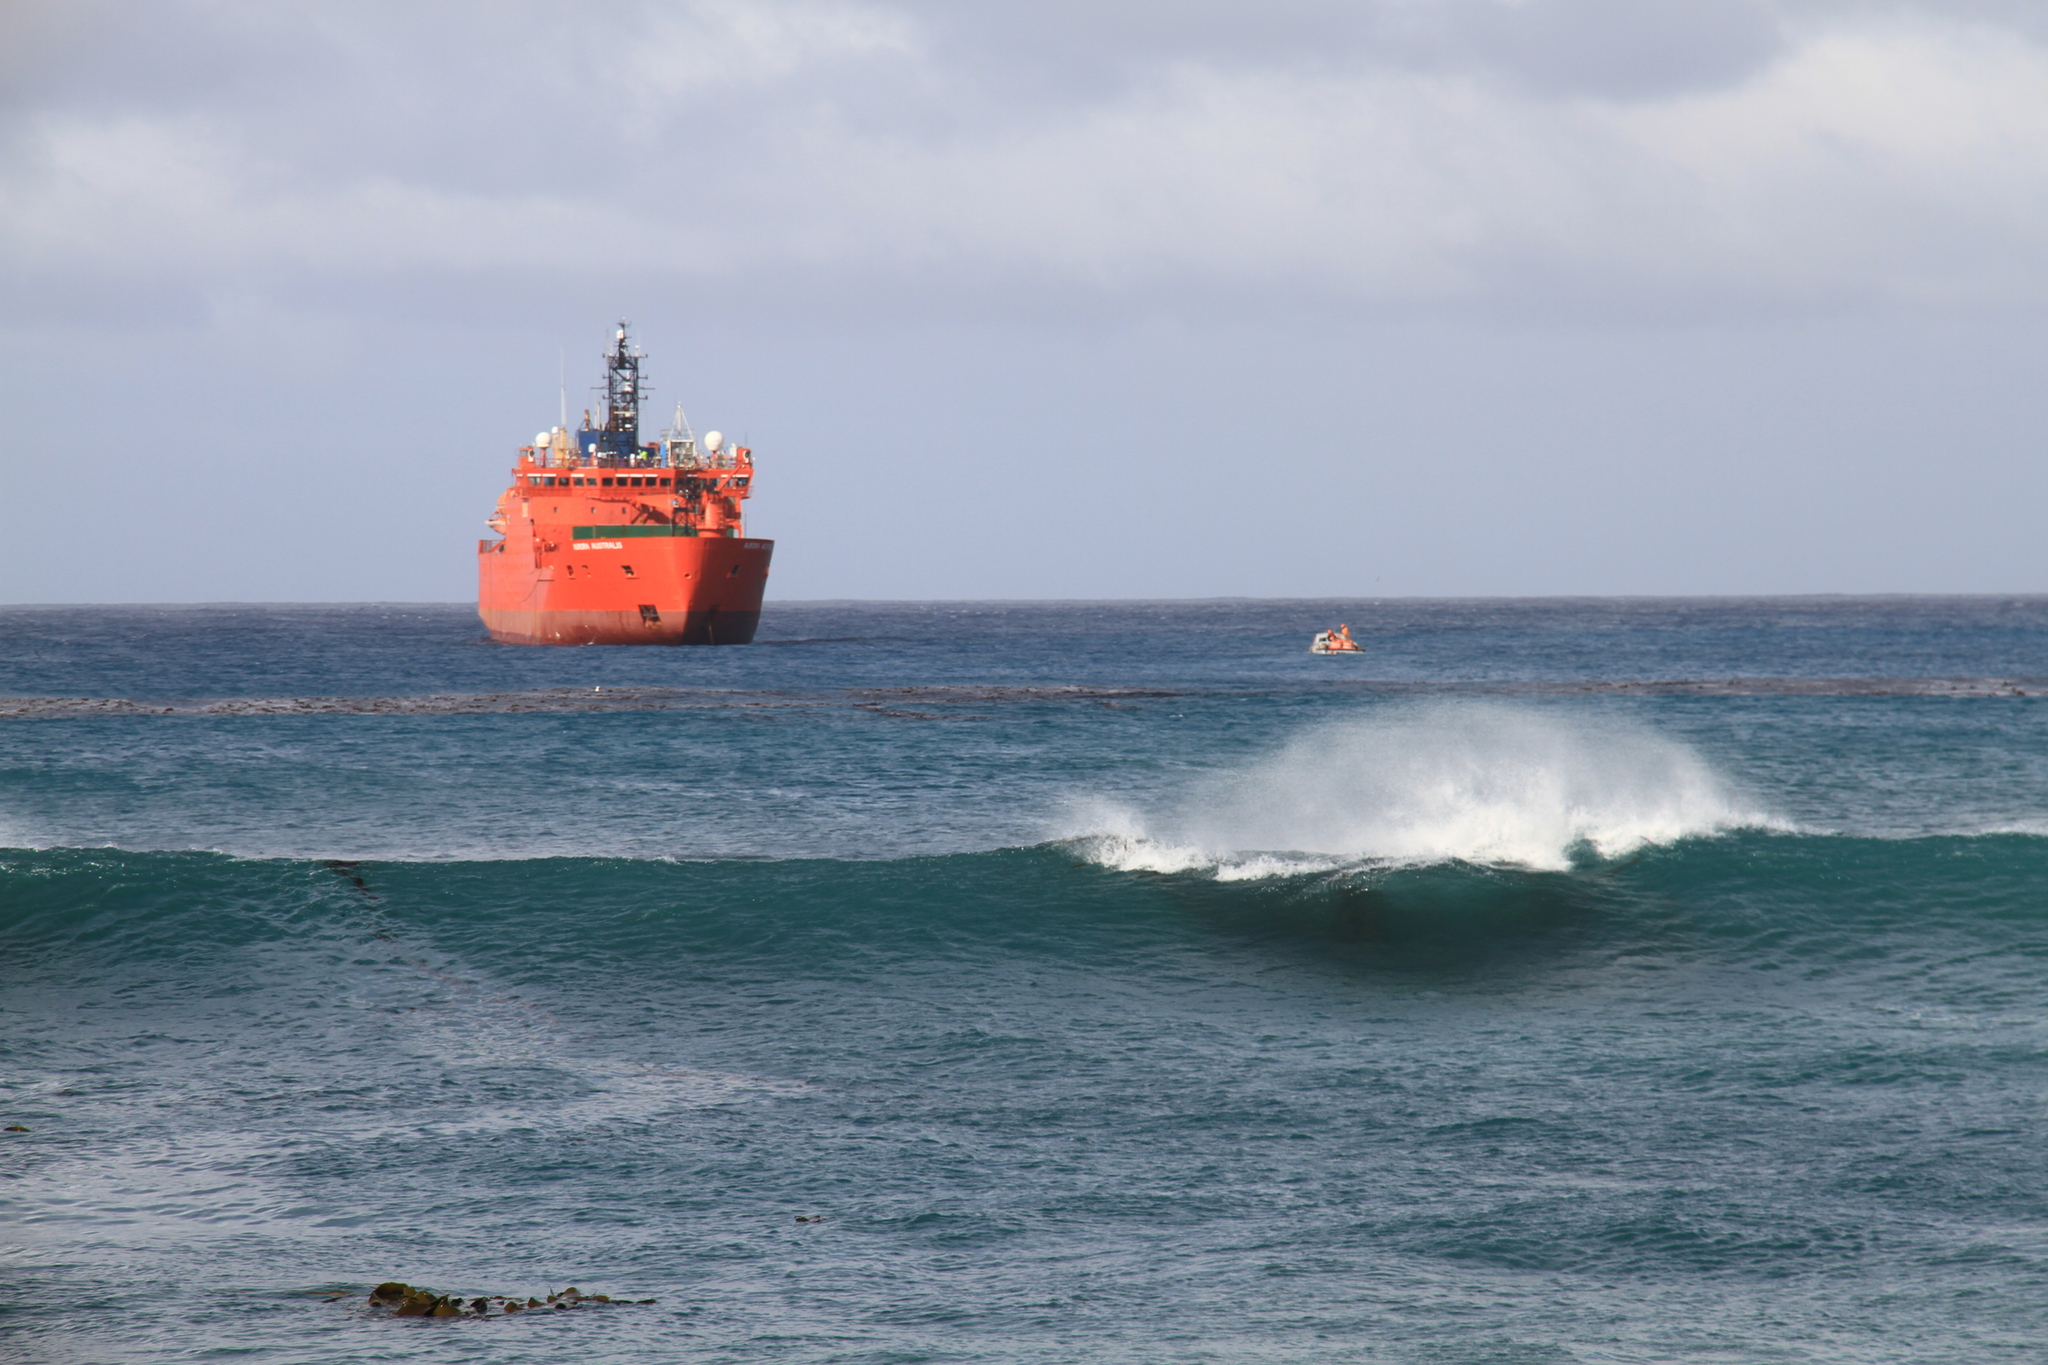 Orange supply vessel travels across the ocean with waves forming in front